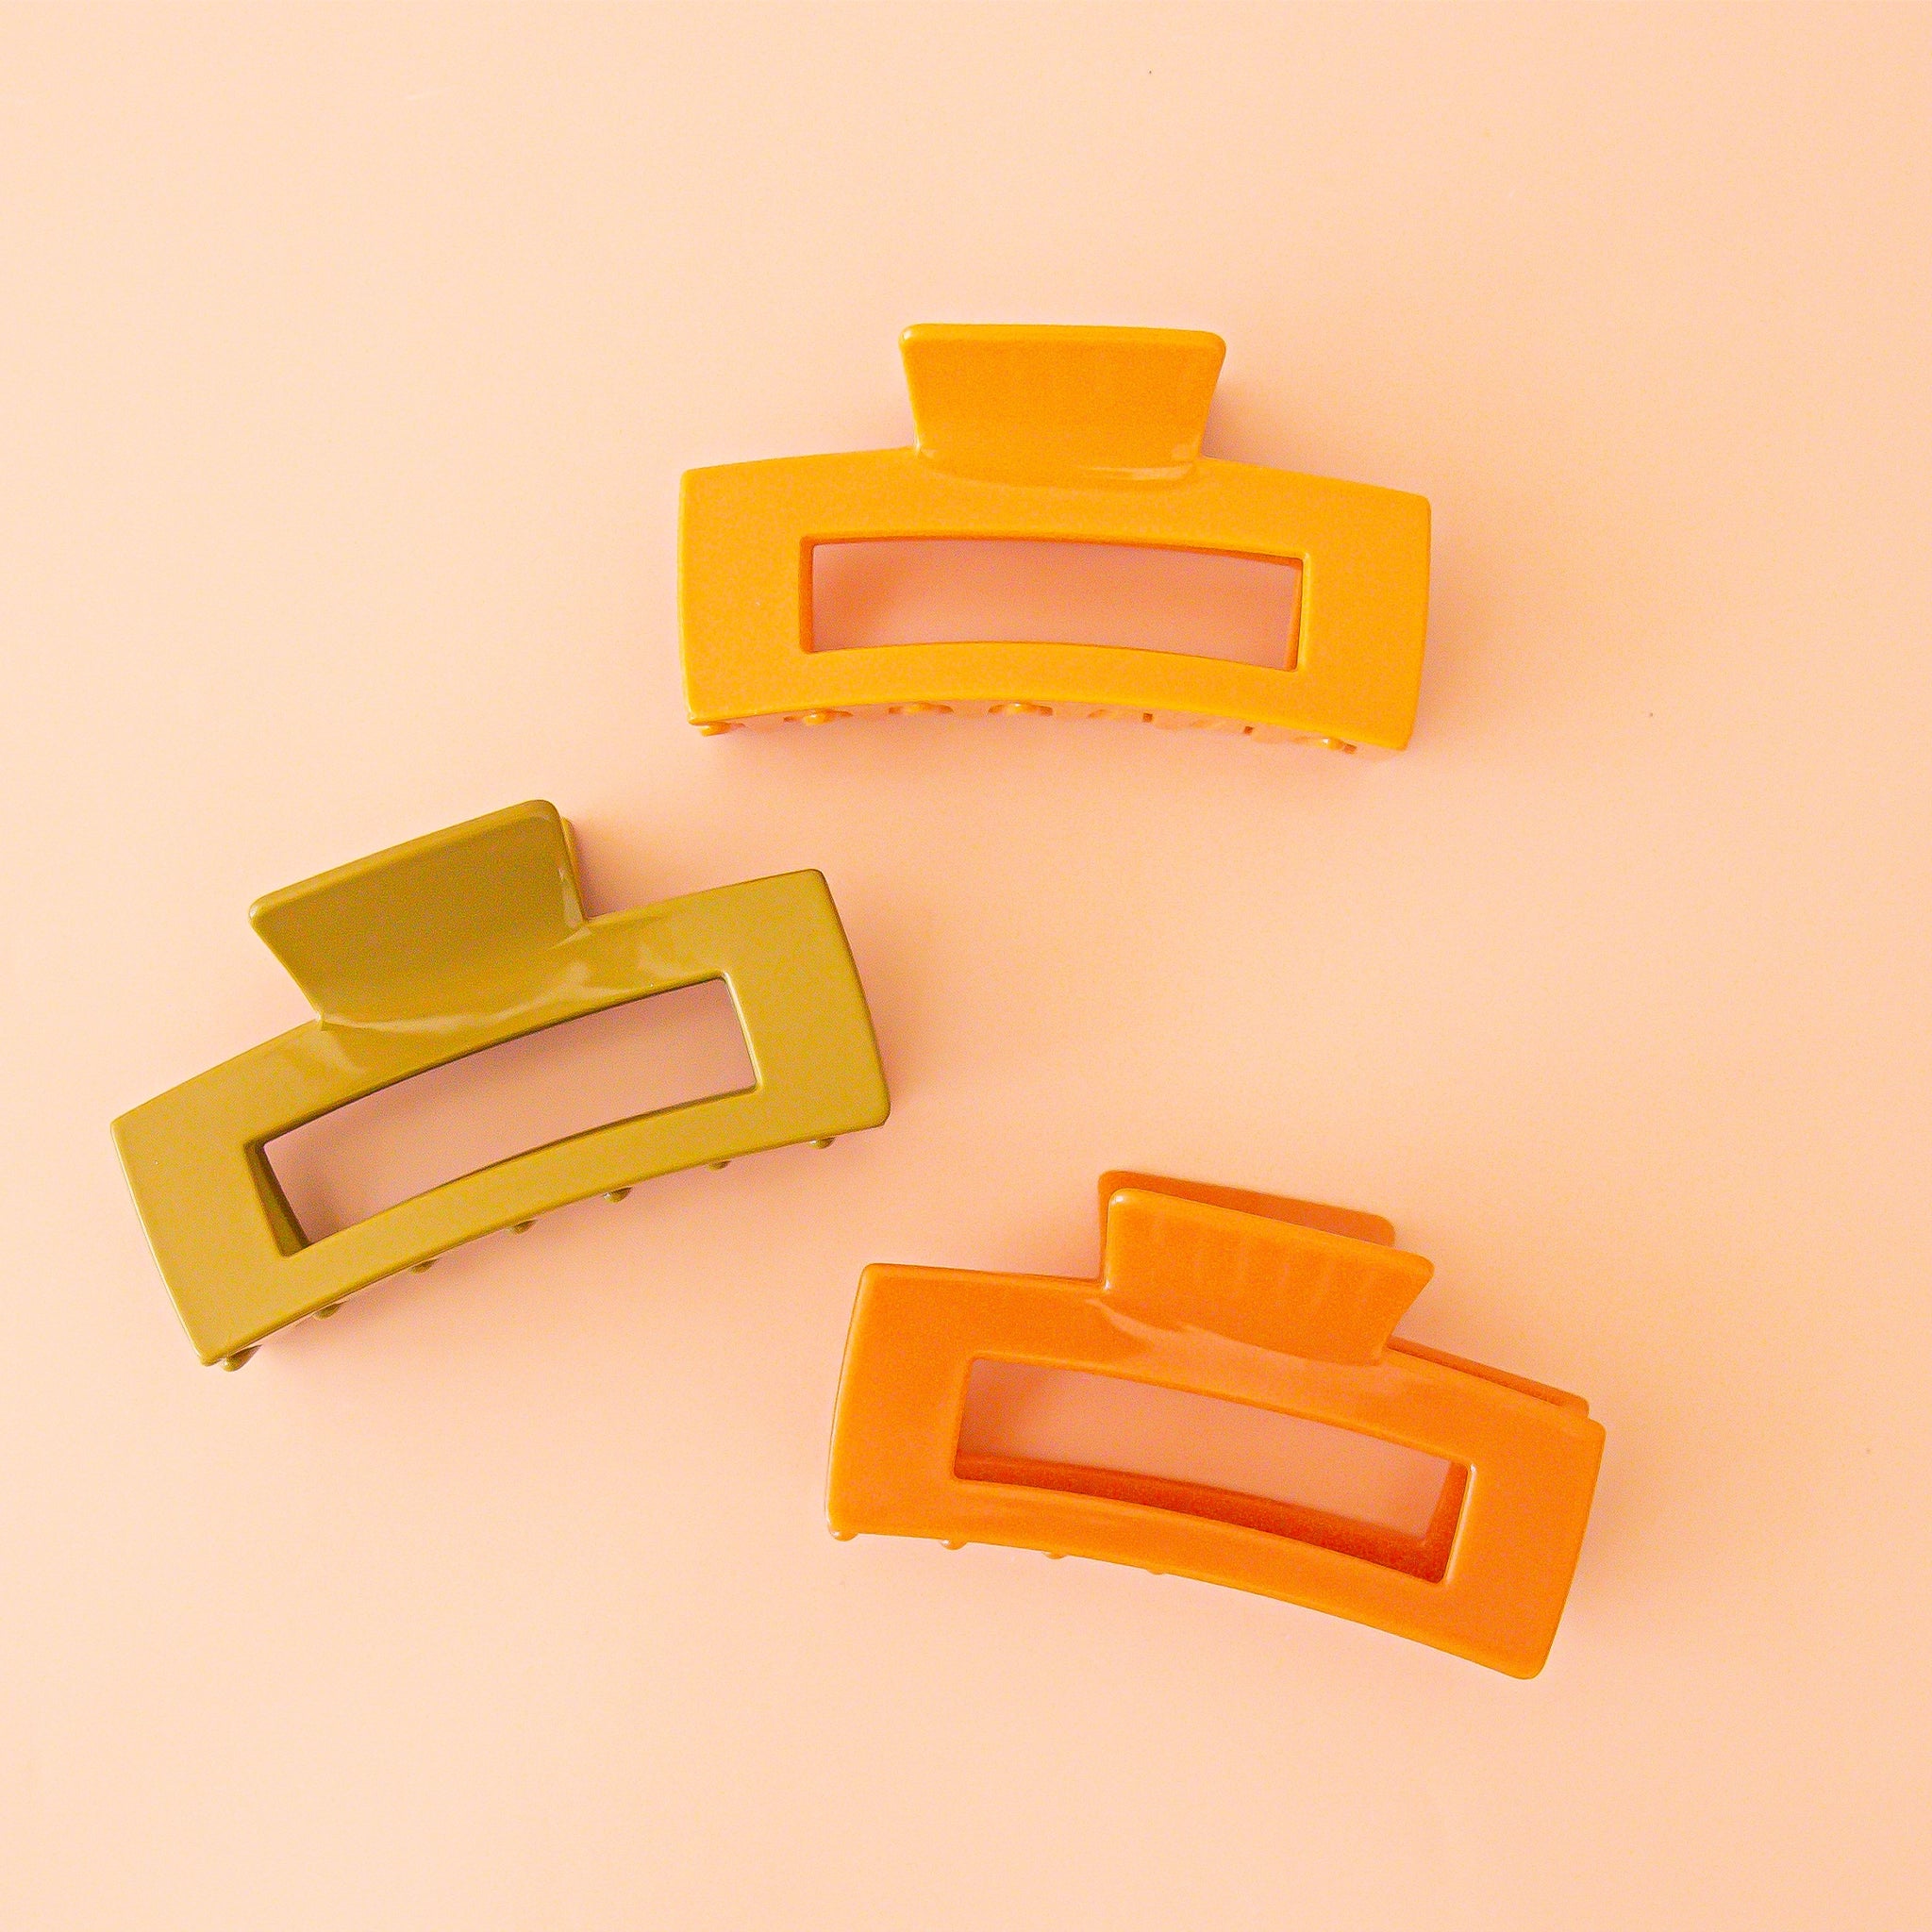 On a peachy background is three rectangle claw clips in different colors. One yellow, one olive, and one orange.